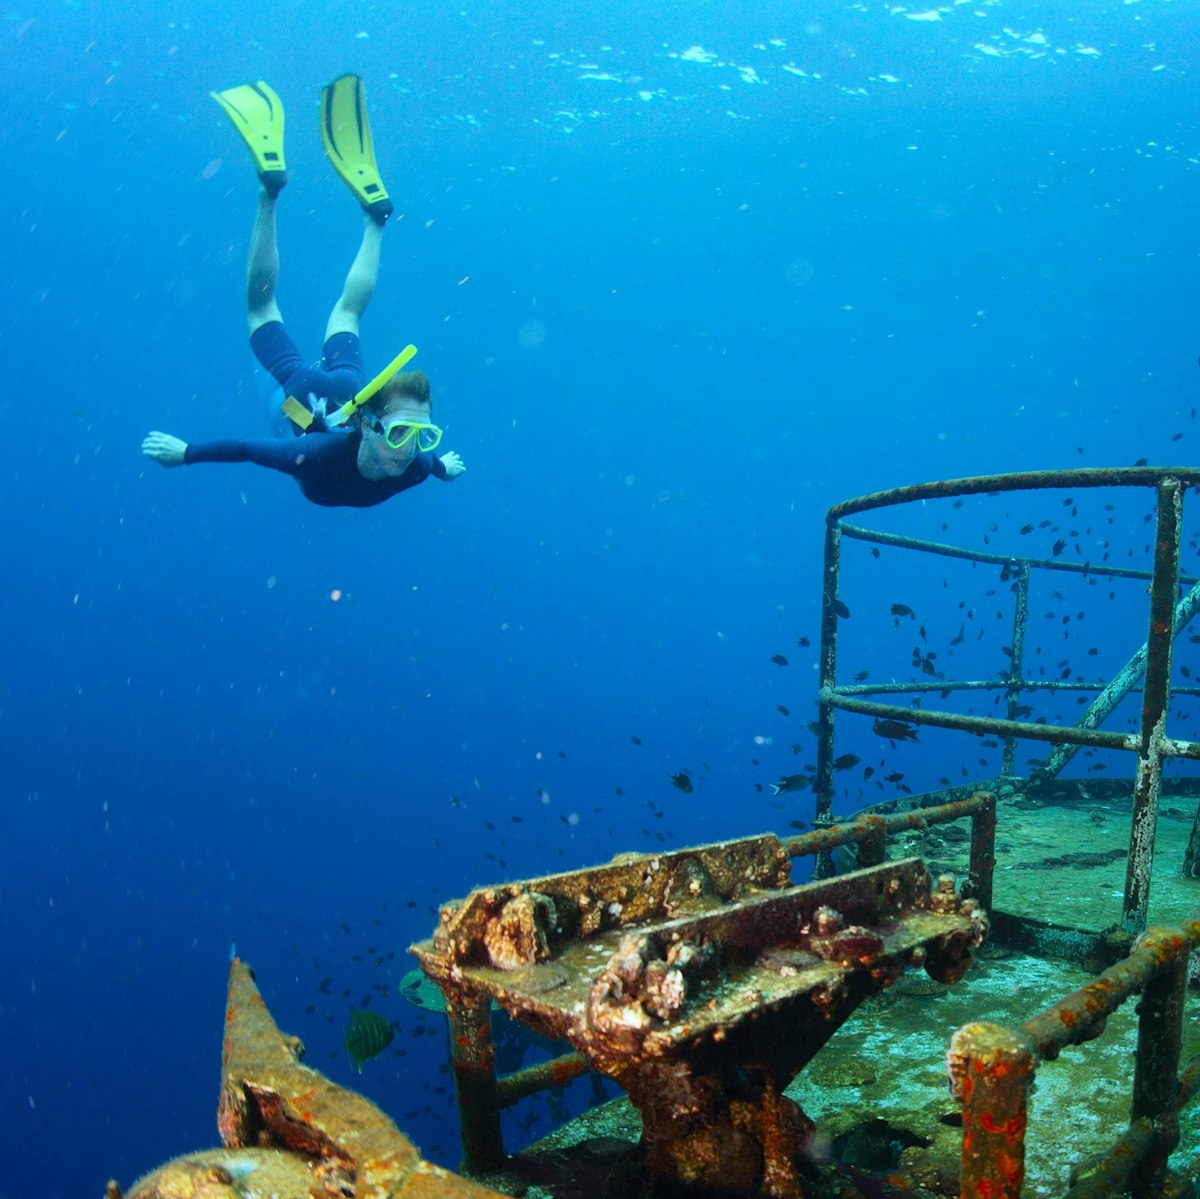 Take a deep dive into history by snorkelling around the captivating wrecks scattered across the Mediterranean. Discover submerged treasures in Greece, Cyprus, Malta, and Italy, where the past and present intermingle beneath the waves.